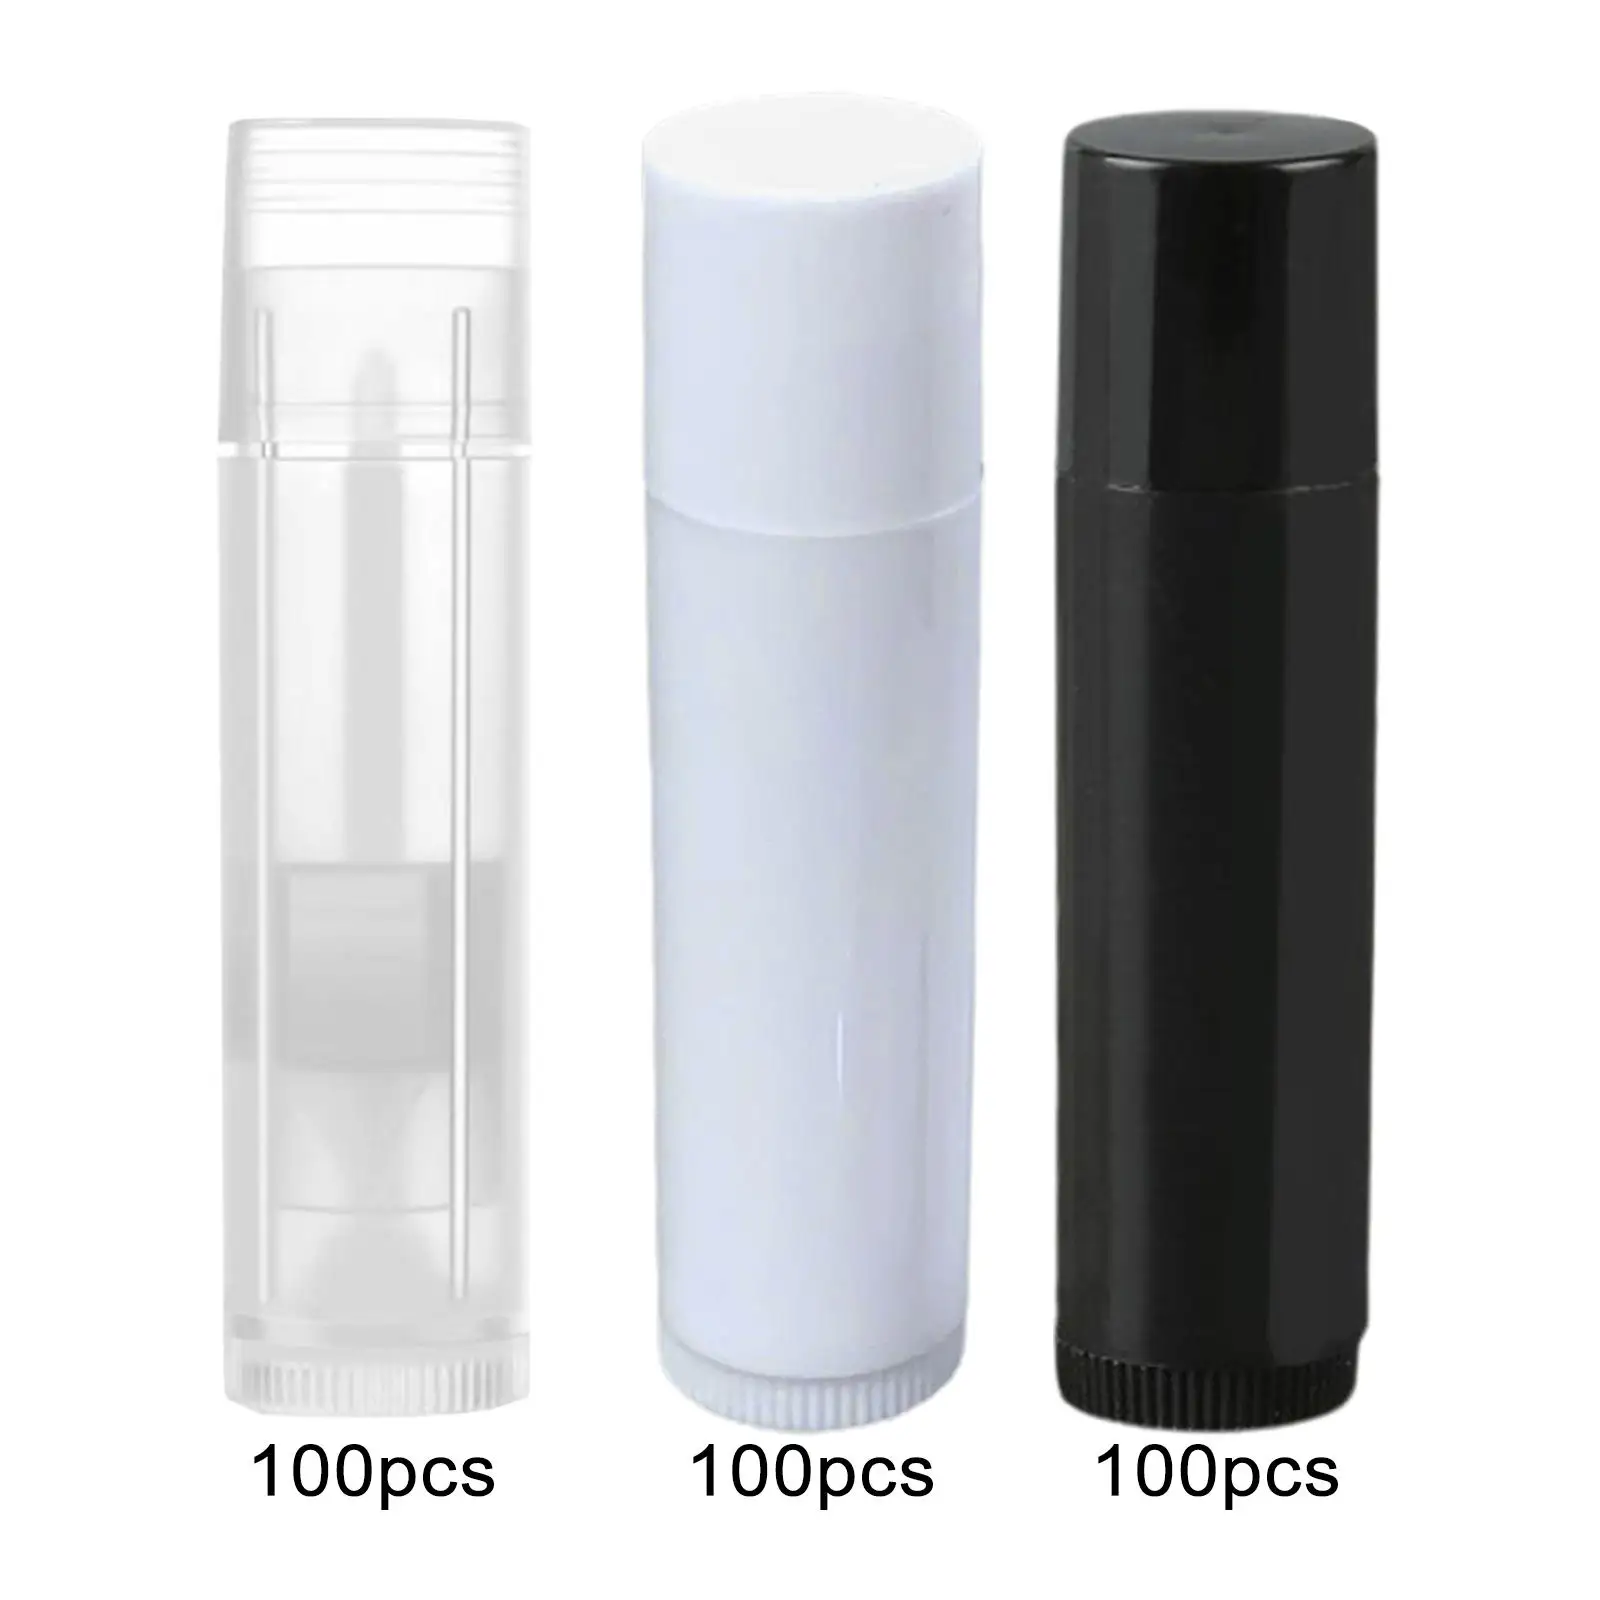 

100Pcs Lip Balm Tubes Cosmetic Bottles Samples Mini Cosmetics DIY Containers Bottles for Women Girls DIY Valentine's Day Present